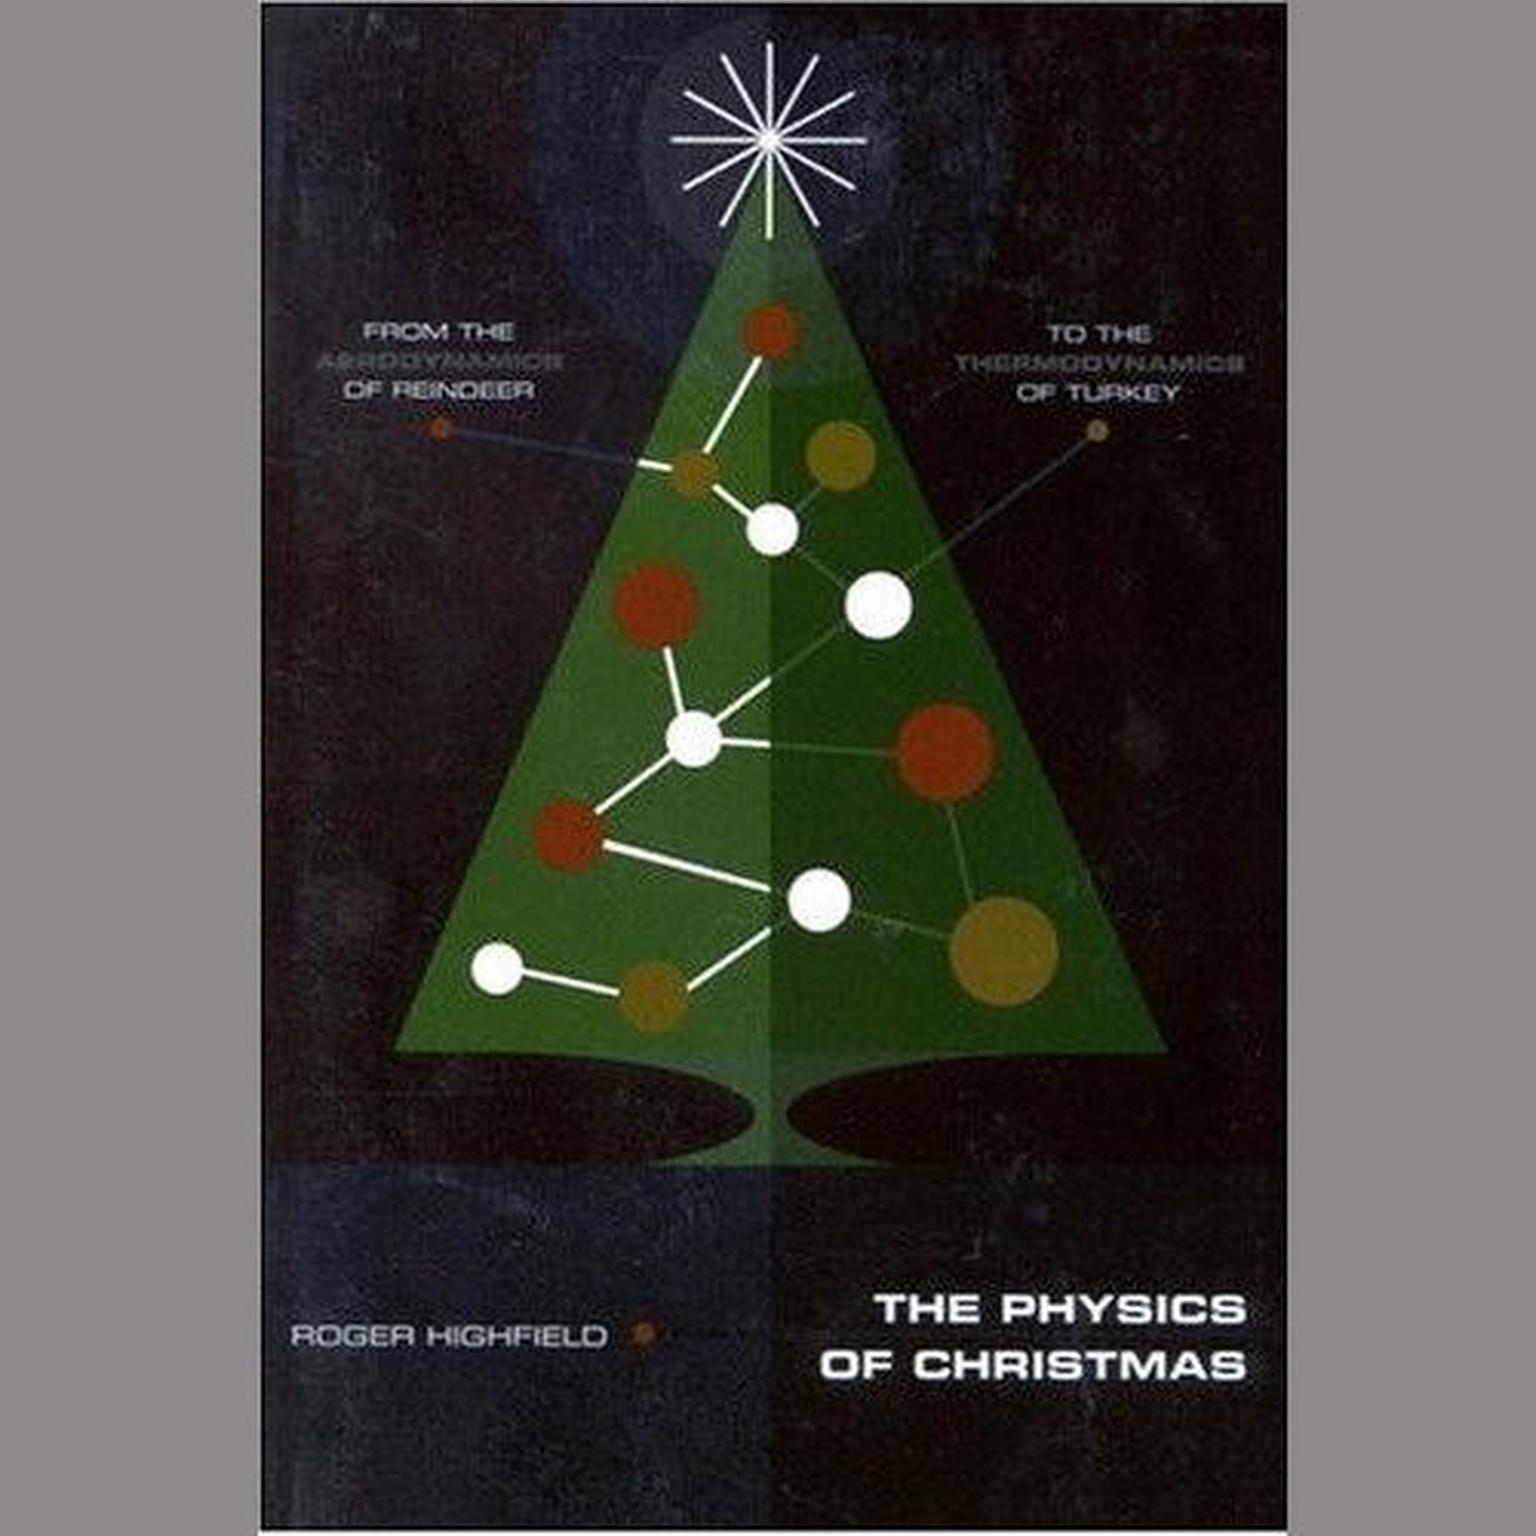 The Physics of Christmas: From the Aerodynamics of Reindeer to the Thermodynamics of Turkey Audiobook, by Roger Highfield